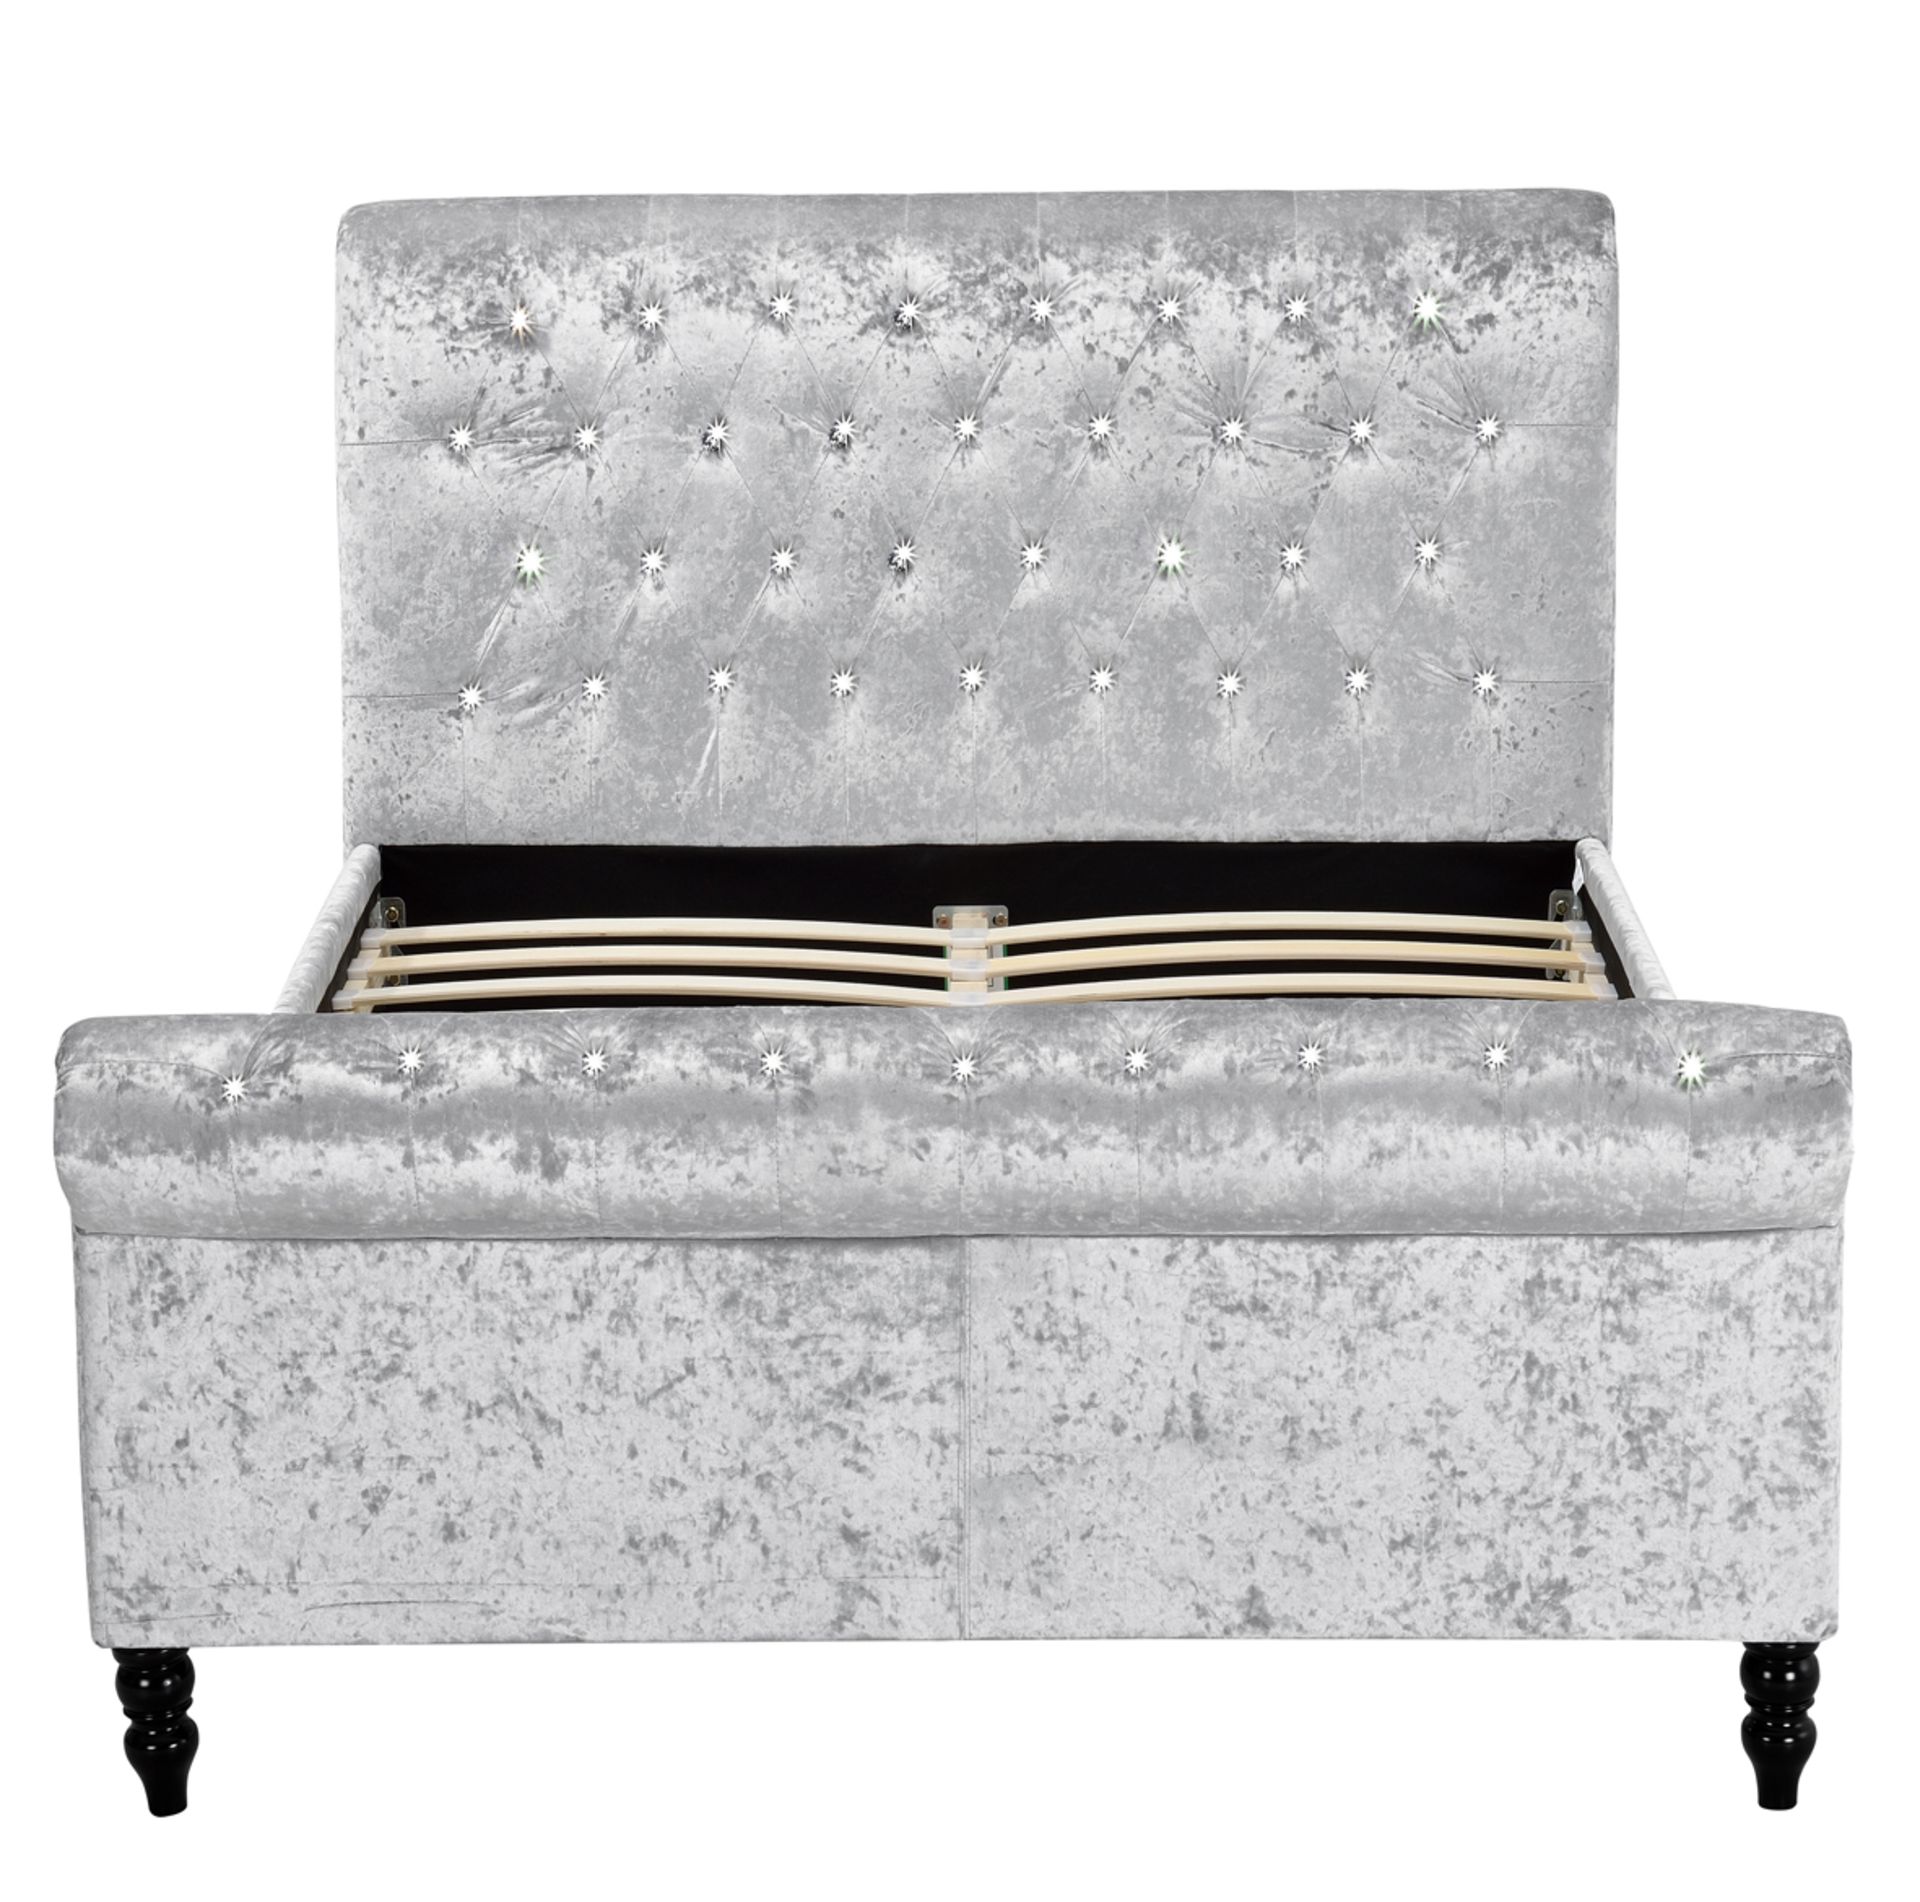 1 x BOXED BRAND NEW ROMAN CONRAD COLLECTION CHESTERFIELD KINGSIZE BED WITH CRUSHED VELVET AND - Image 2 of 2